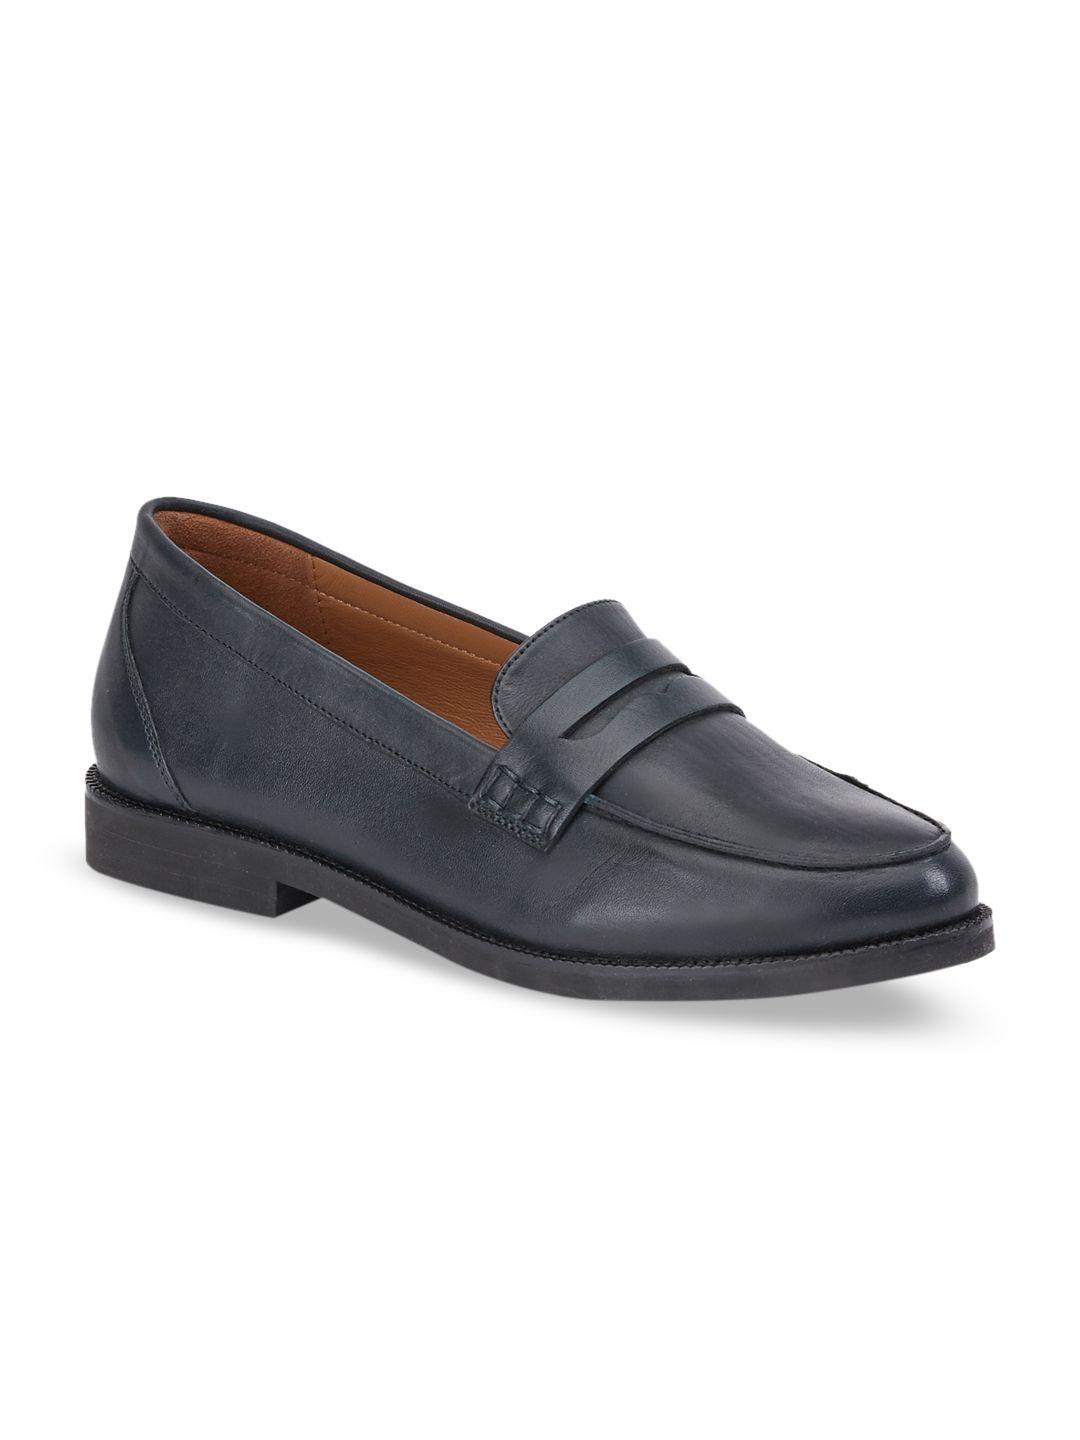 saint g women navy blue solid leather formal penny loafers